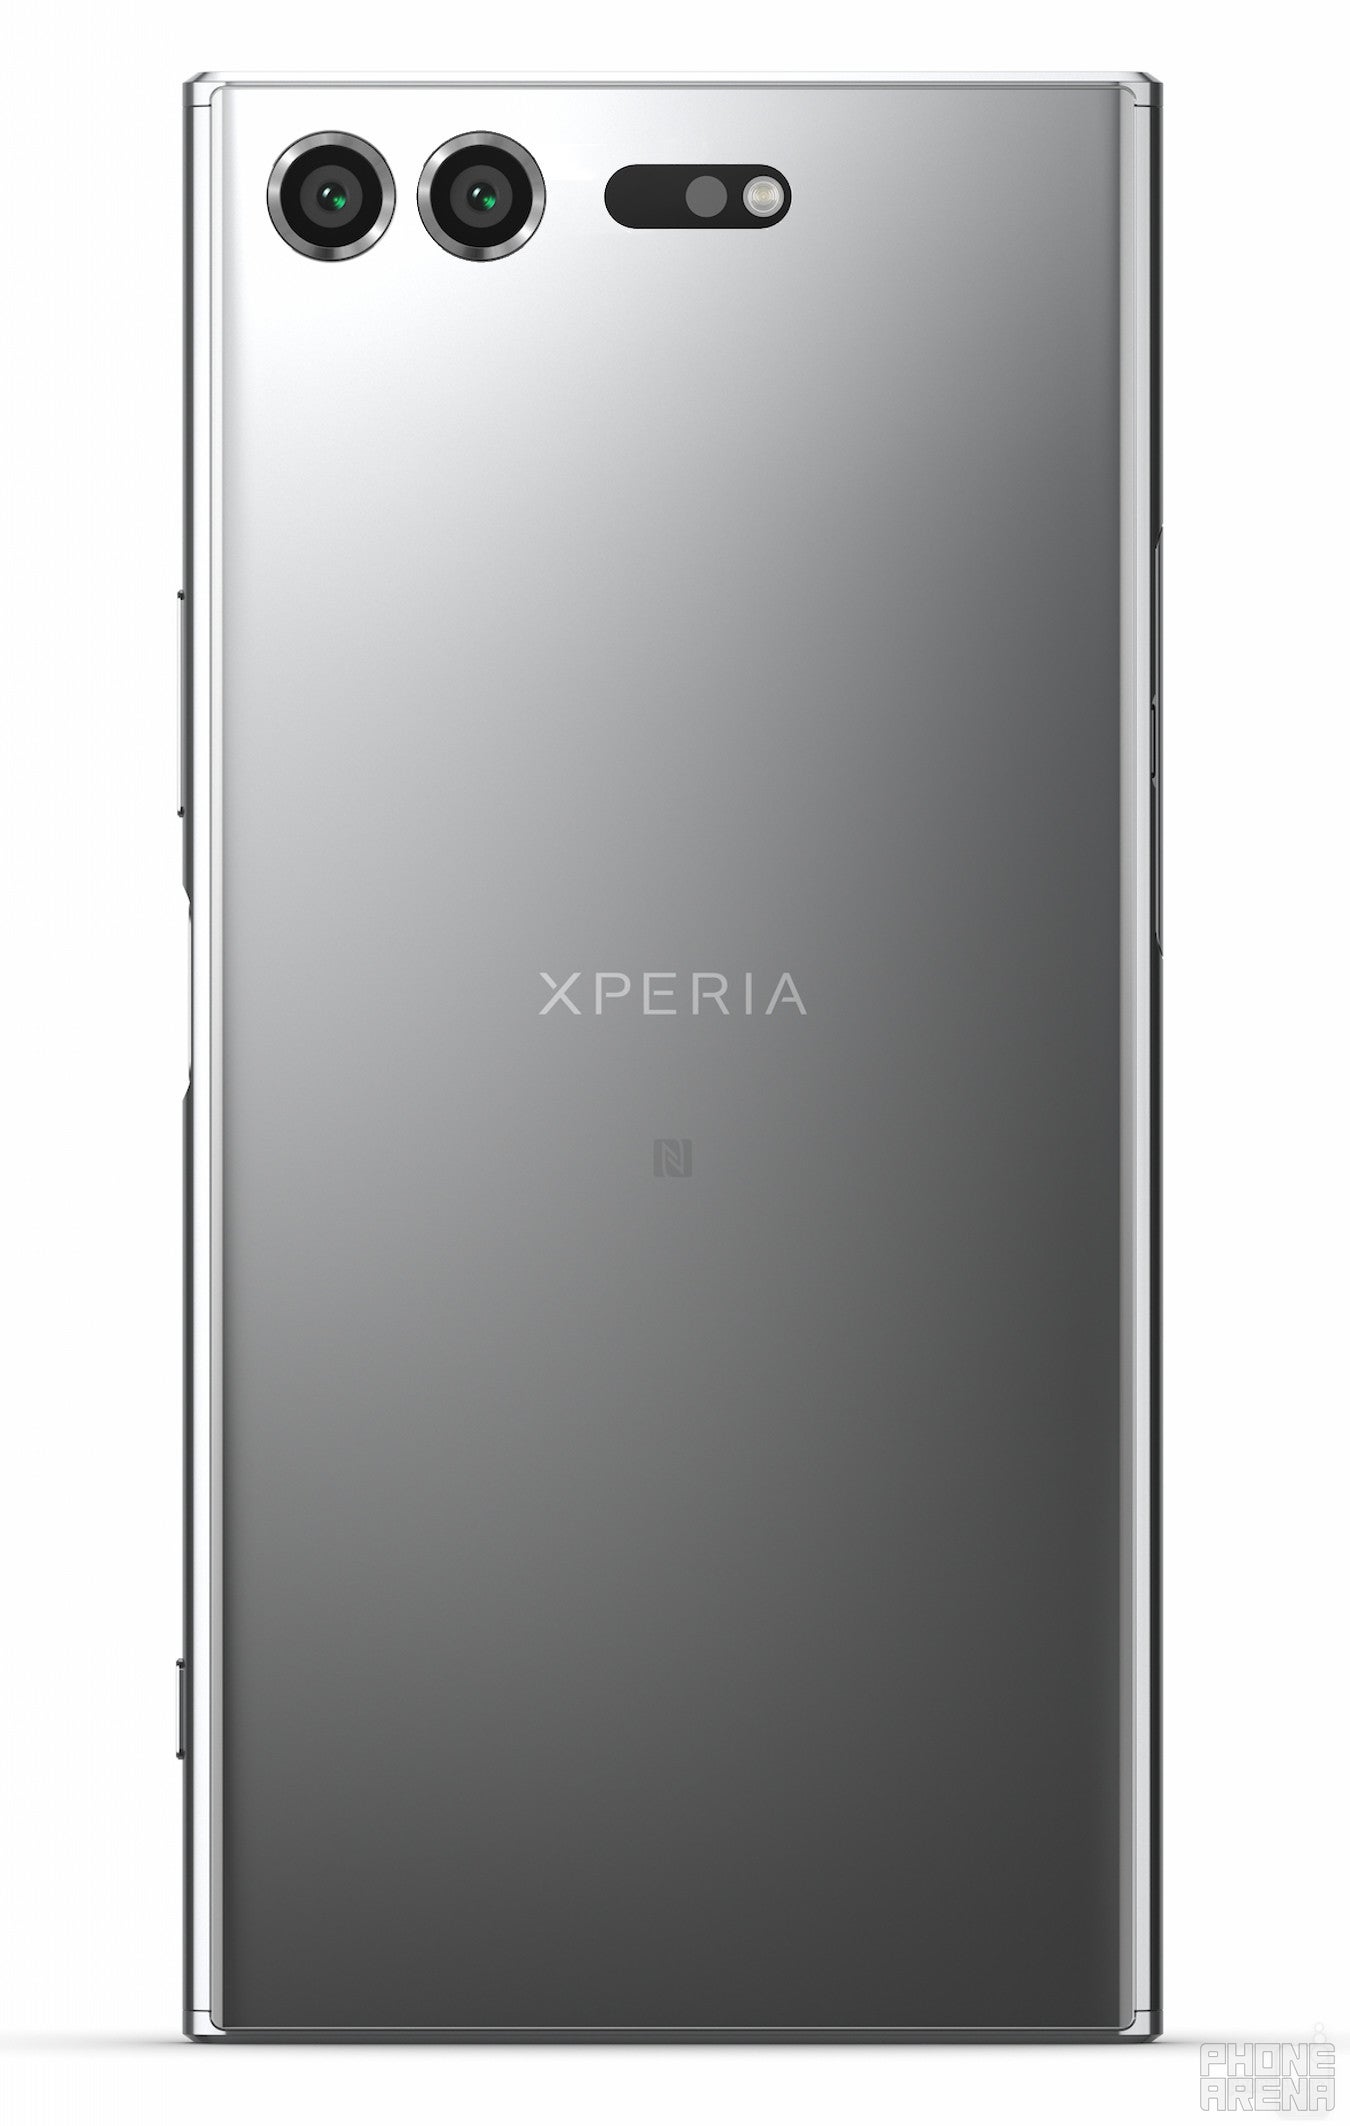 Is Sony&#039;s first dual-camera phone right around the corner? - Sony Xperia XZ Pro rumor review: Design, specs, features, price and release date